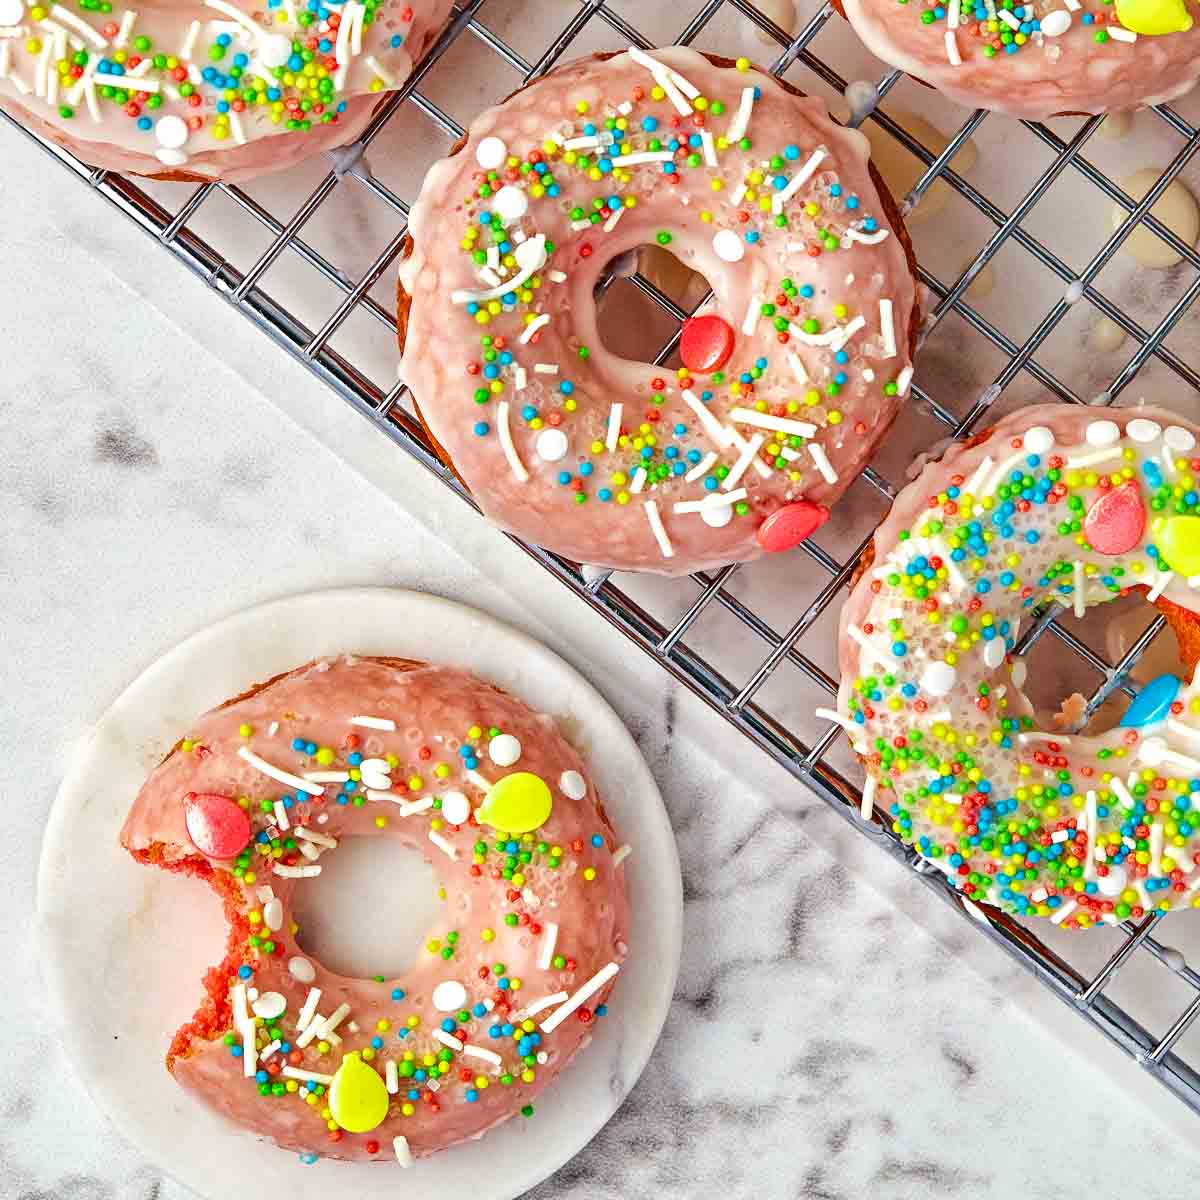 Colorful sprinkle-topped donuts with pink icing on a cooling rack and plate.